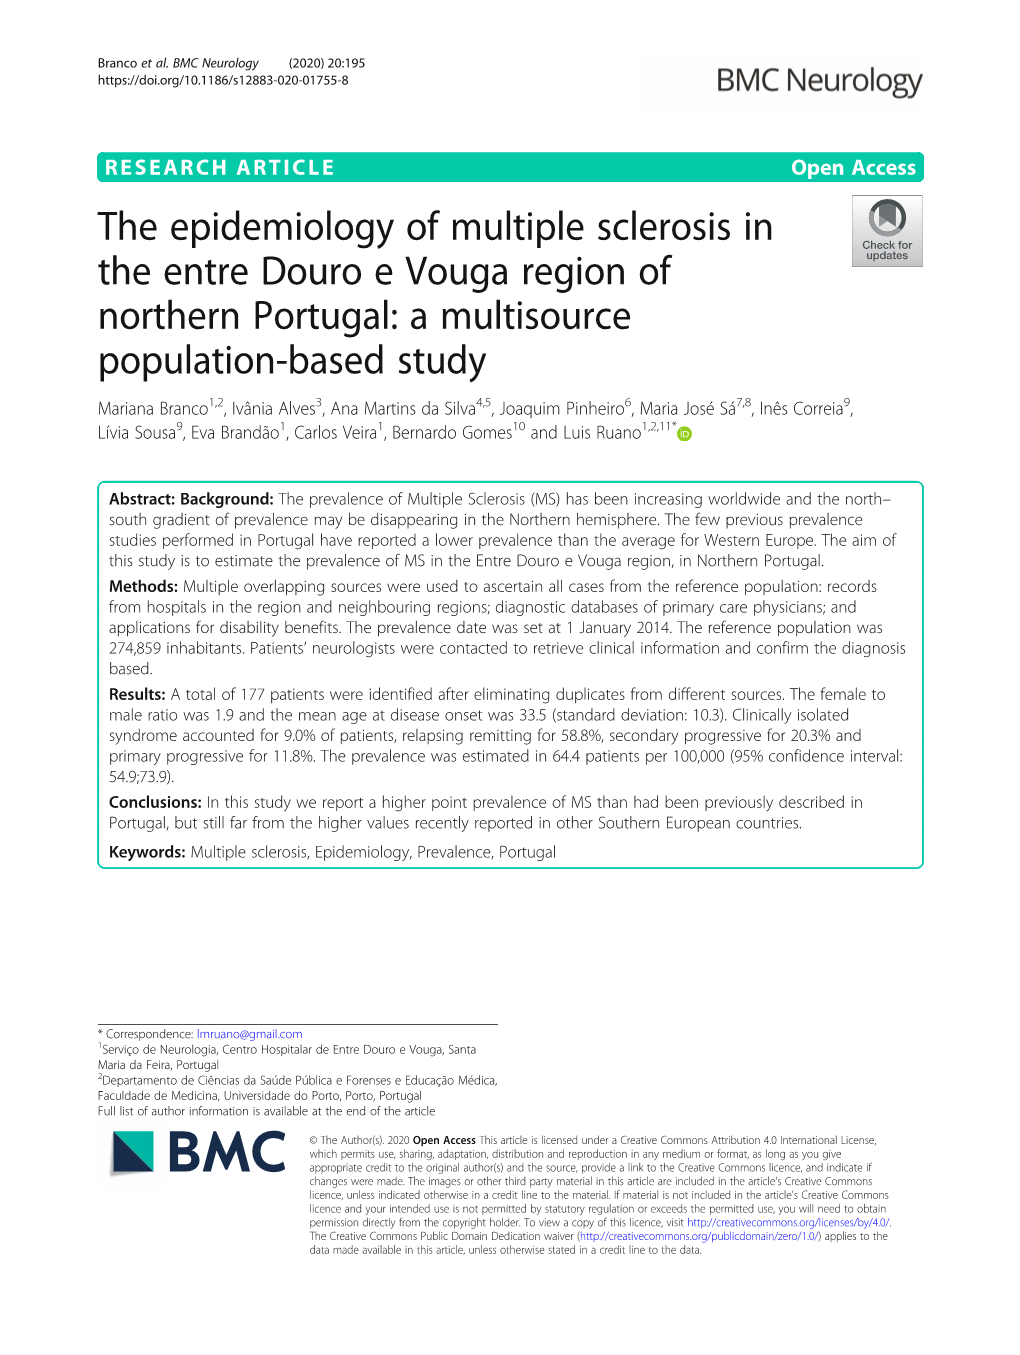 The Epidemiology of Multiple Sclerosis in the Entre